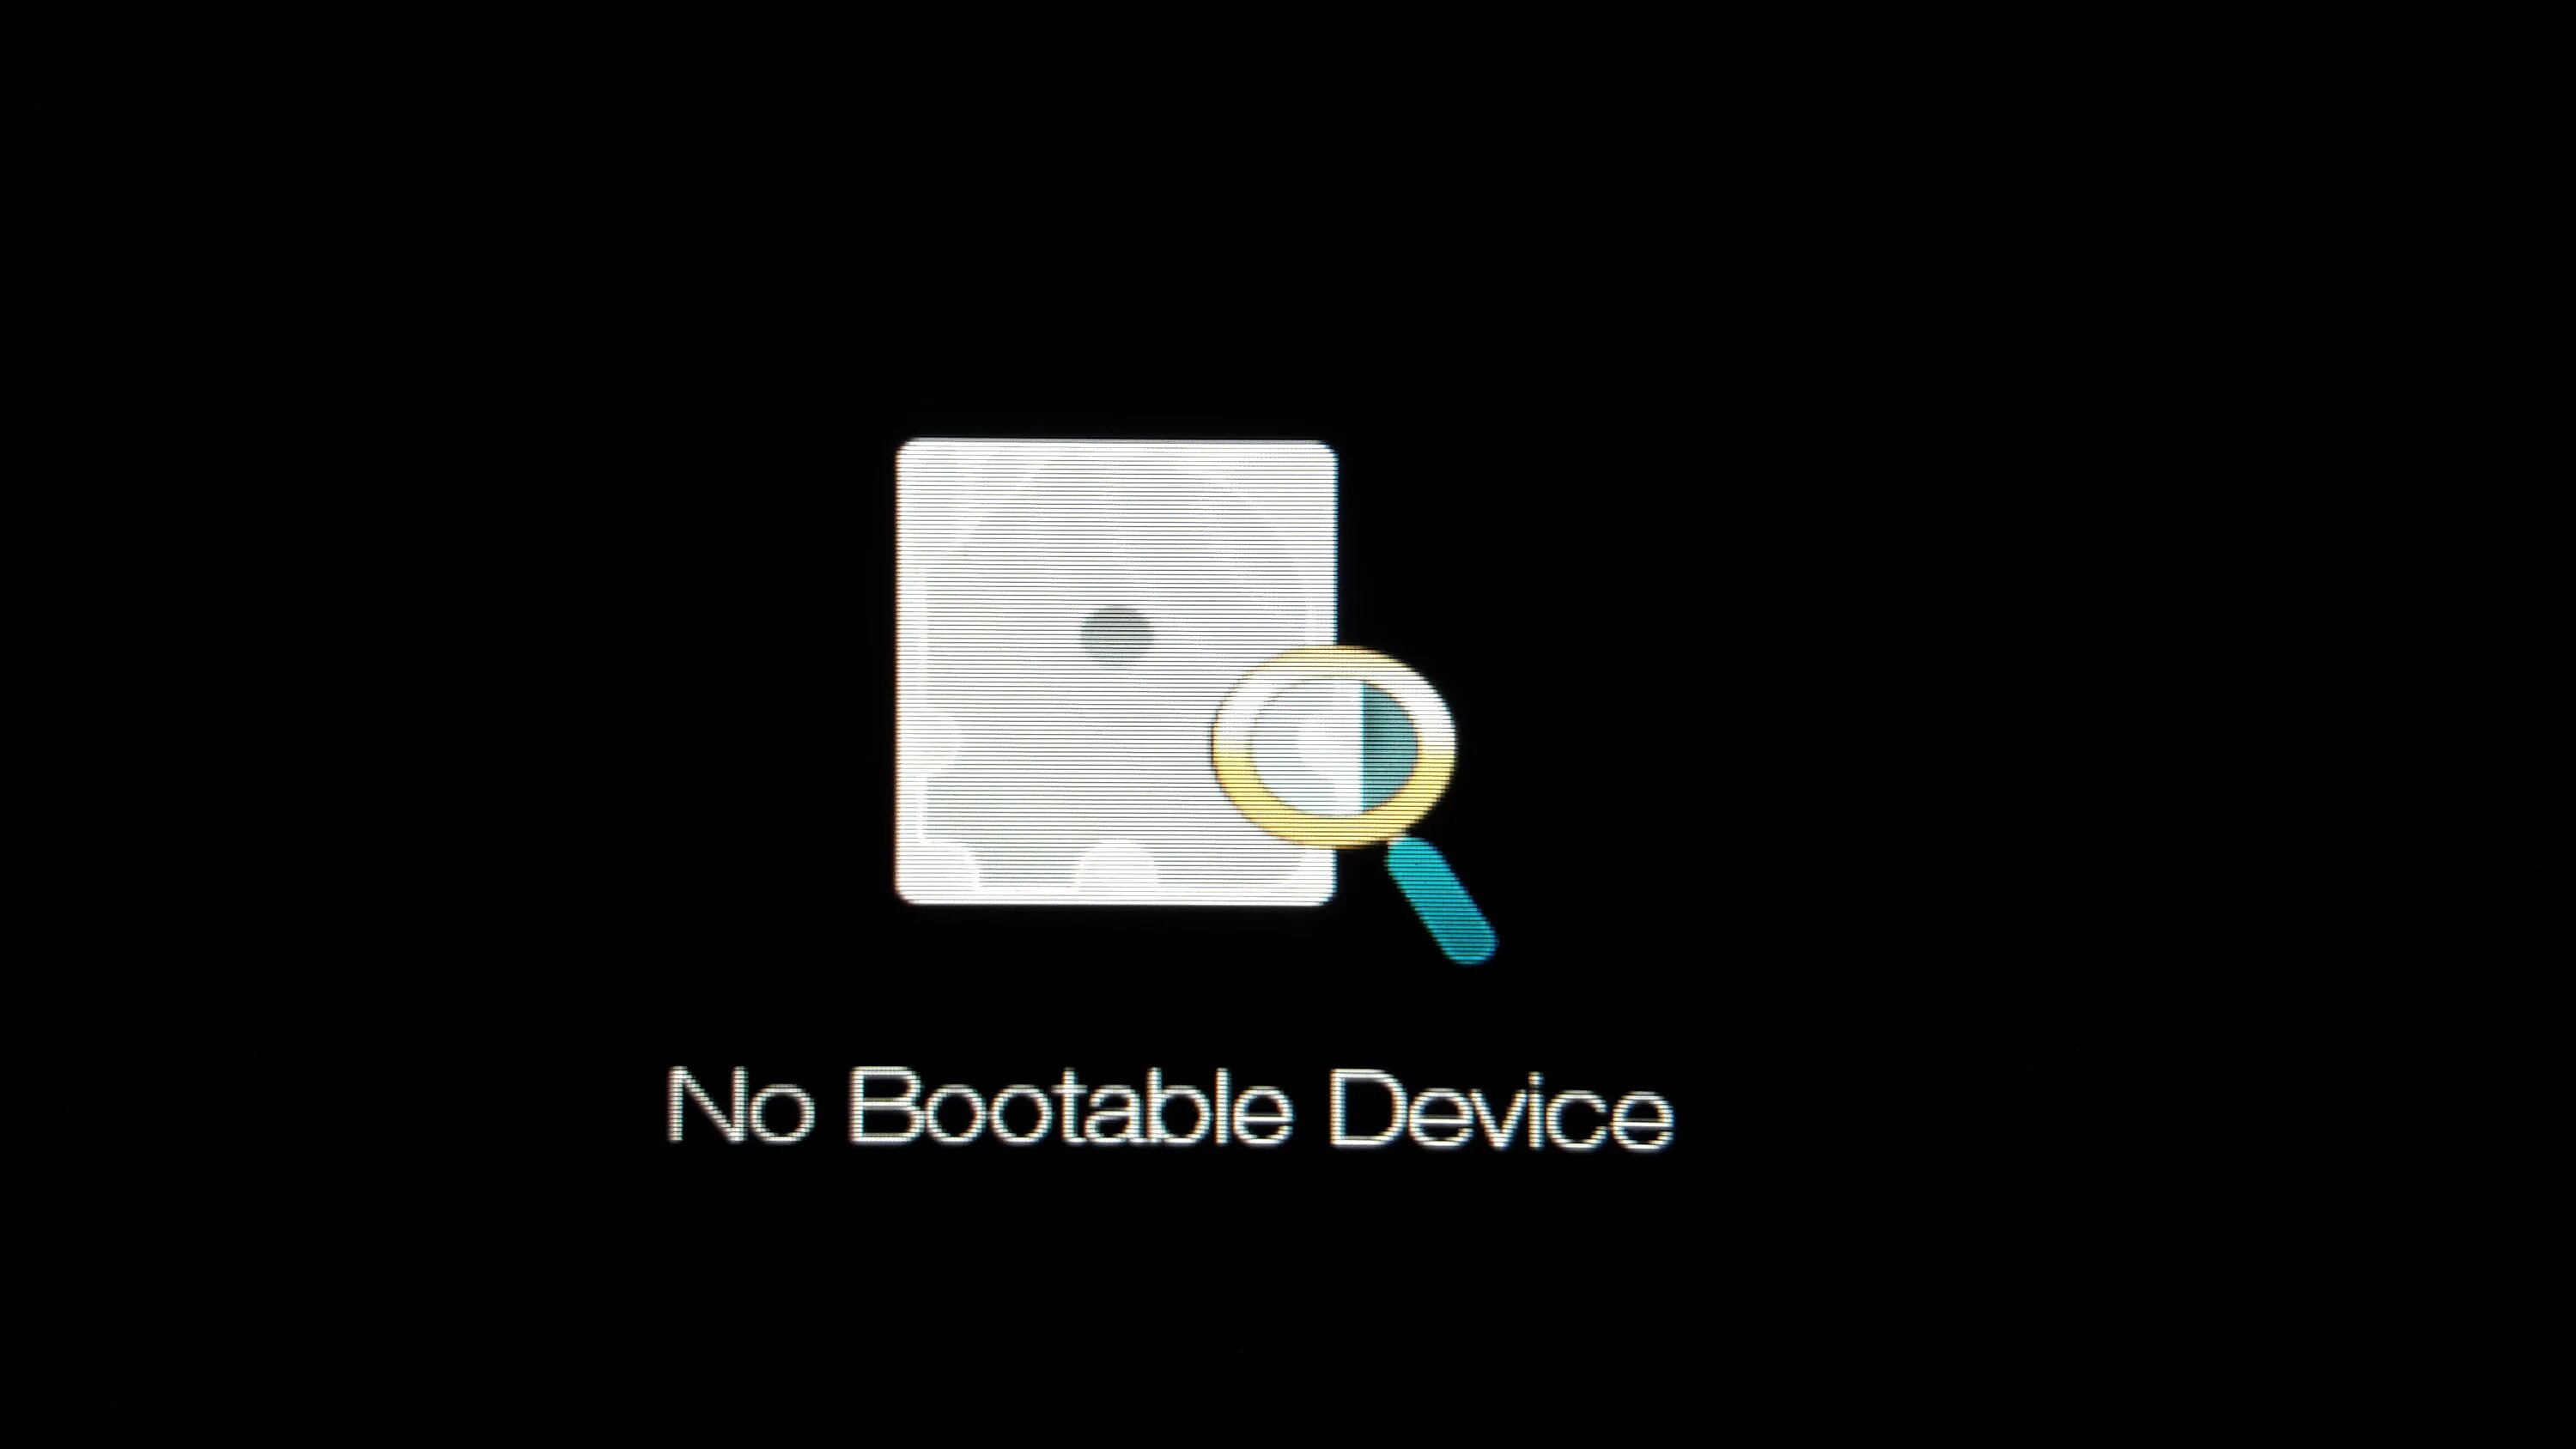 No Bootable device Acer. No Bootable device на ноутбуке. No Bootable device на ноутбуке Acer. No Bootable device на ноутбуке Acer Aspire. No booting device ноутбук